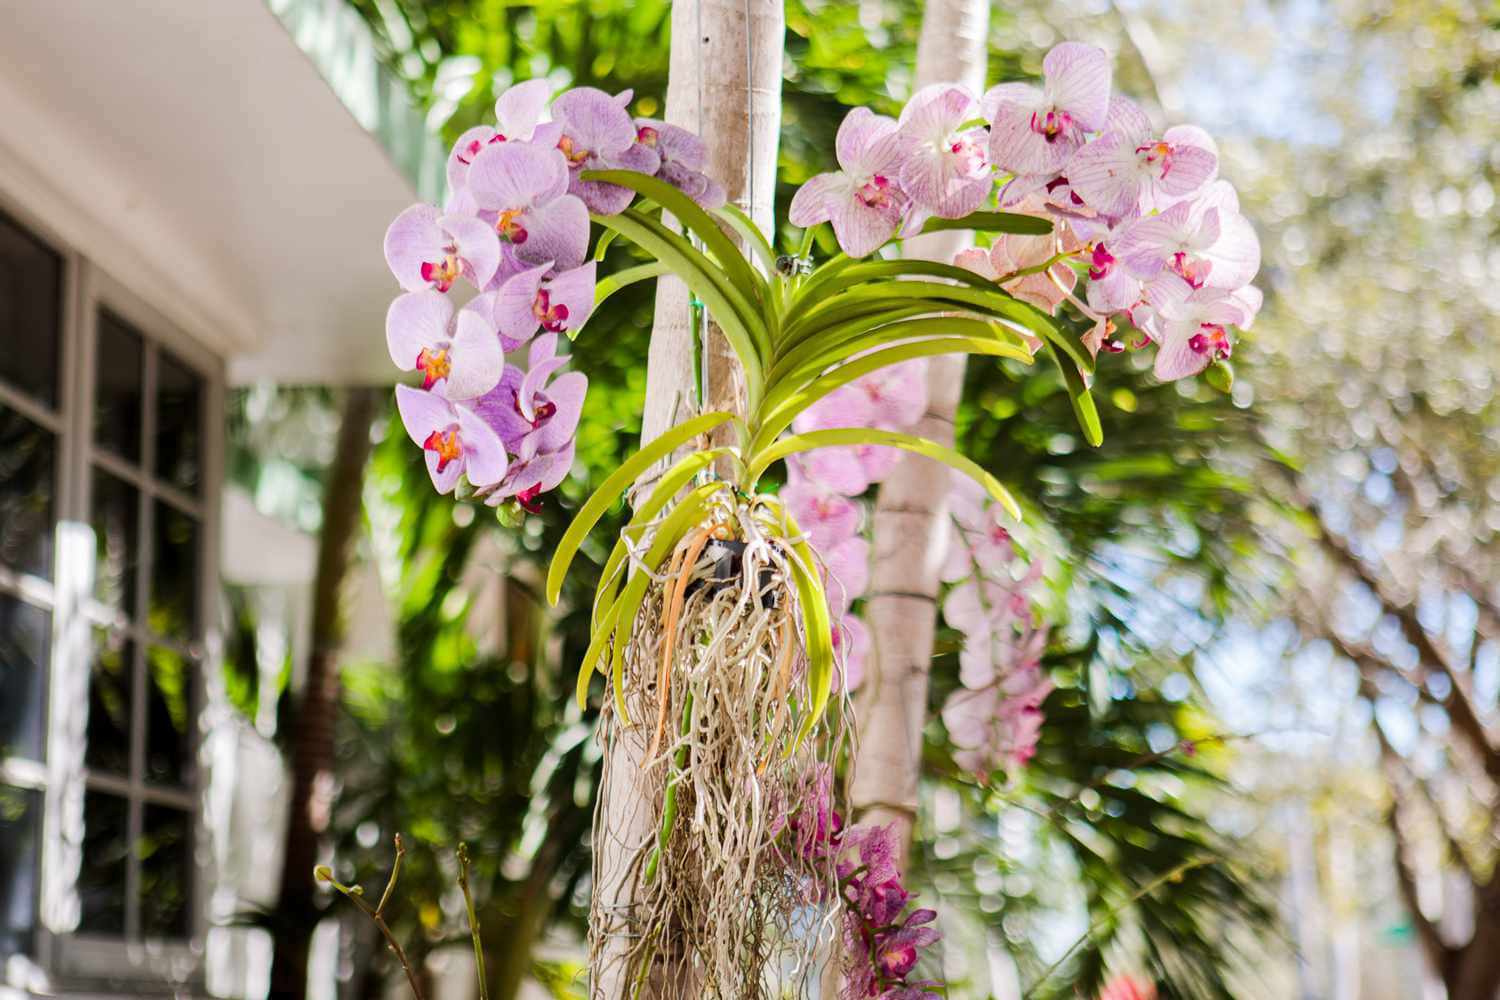 Orchids Hanging From A Tree In Front Of A Building